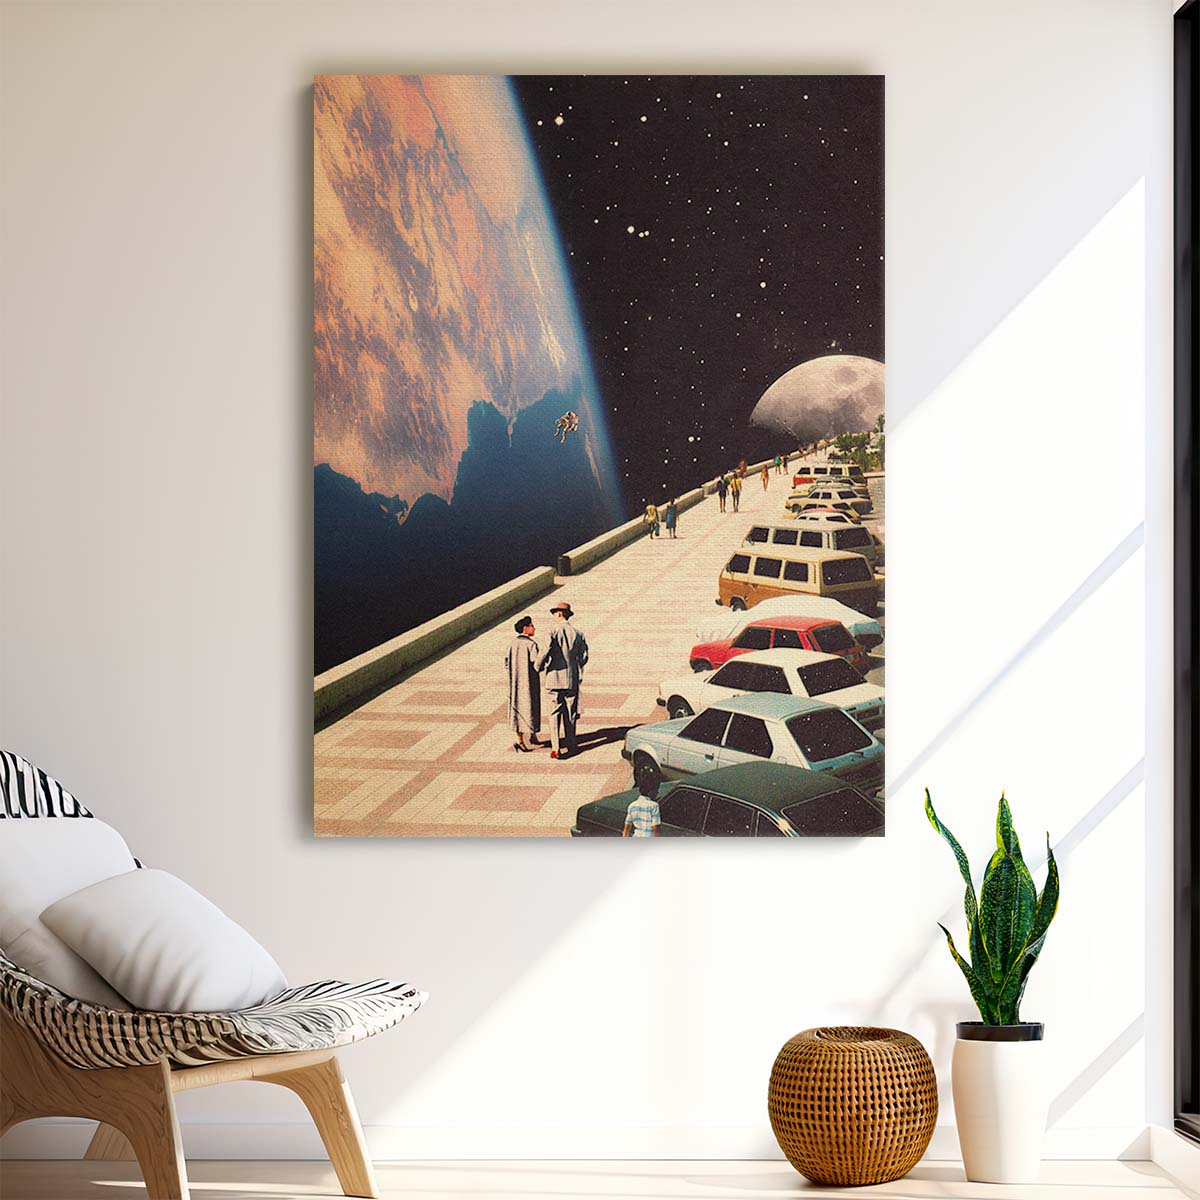 Surreal Space Collage Art - Retro Futuristic Adventure Illustration by Luxuriance Designs, made in USA